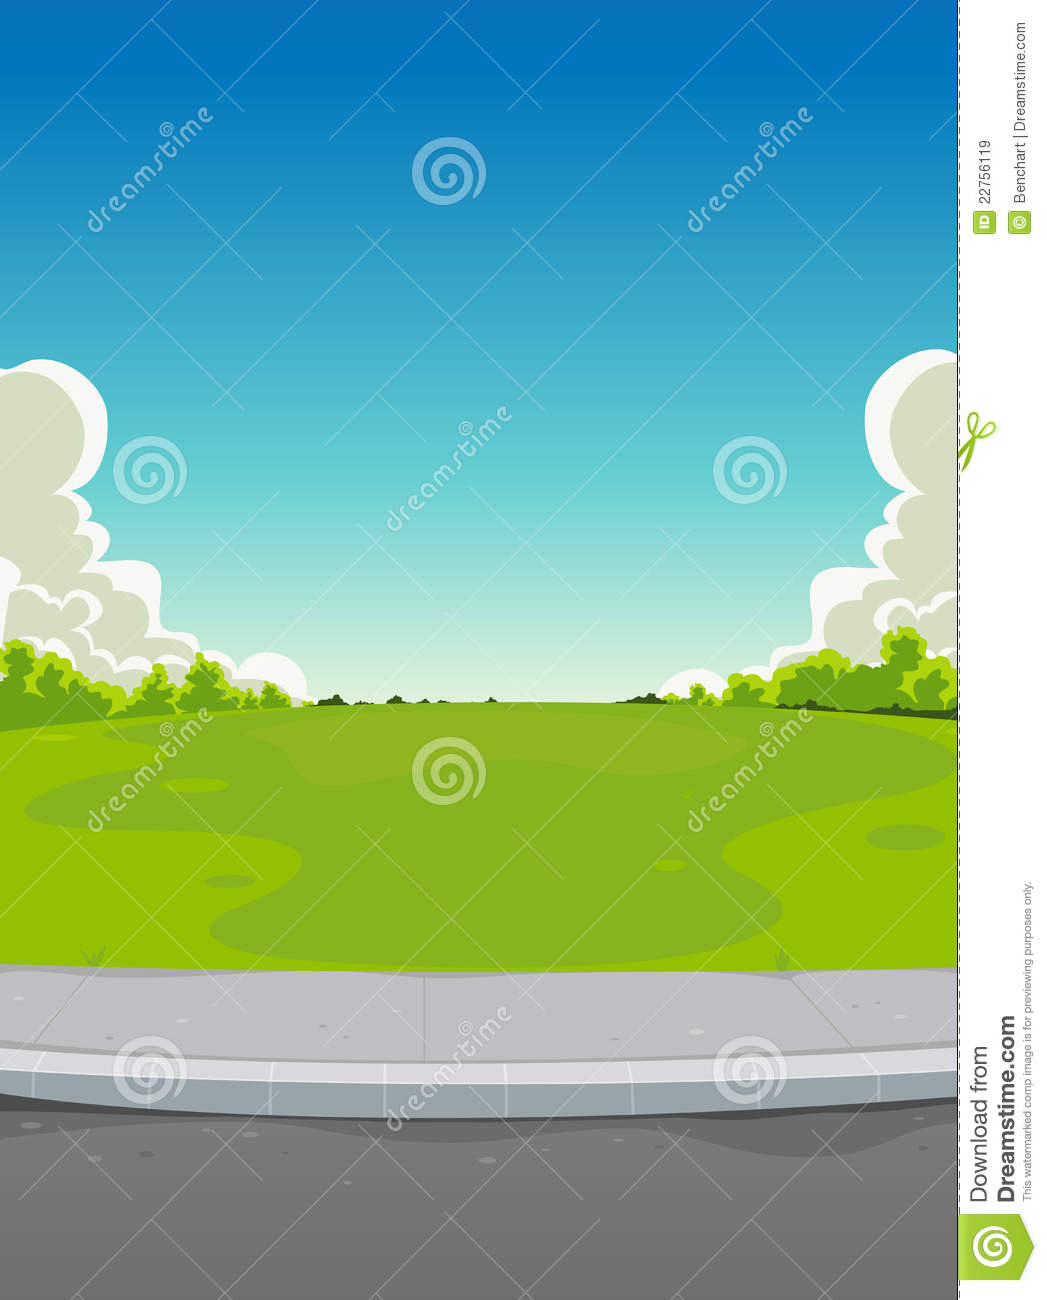 Pavement And Green Park Background Royalty Free Stock Images   Image    